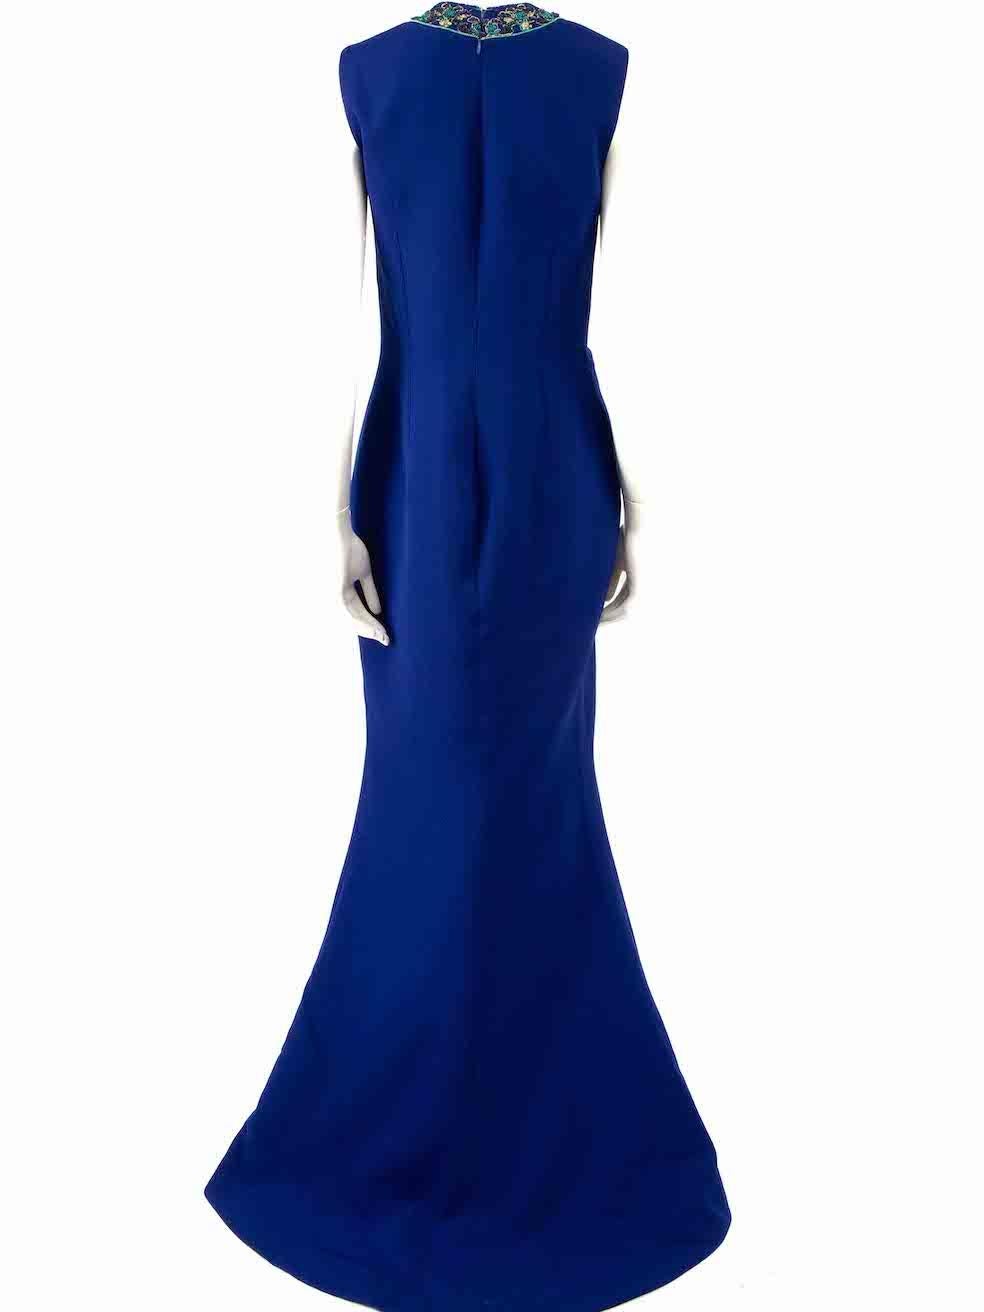 Honayda A/W22 Blue Embellished Gathered Gown Size XL In New Condition For Sale In London, GB